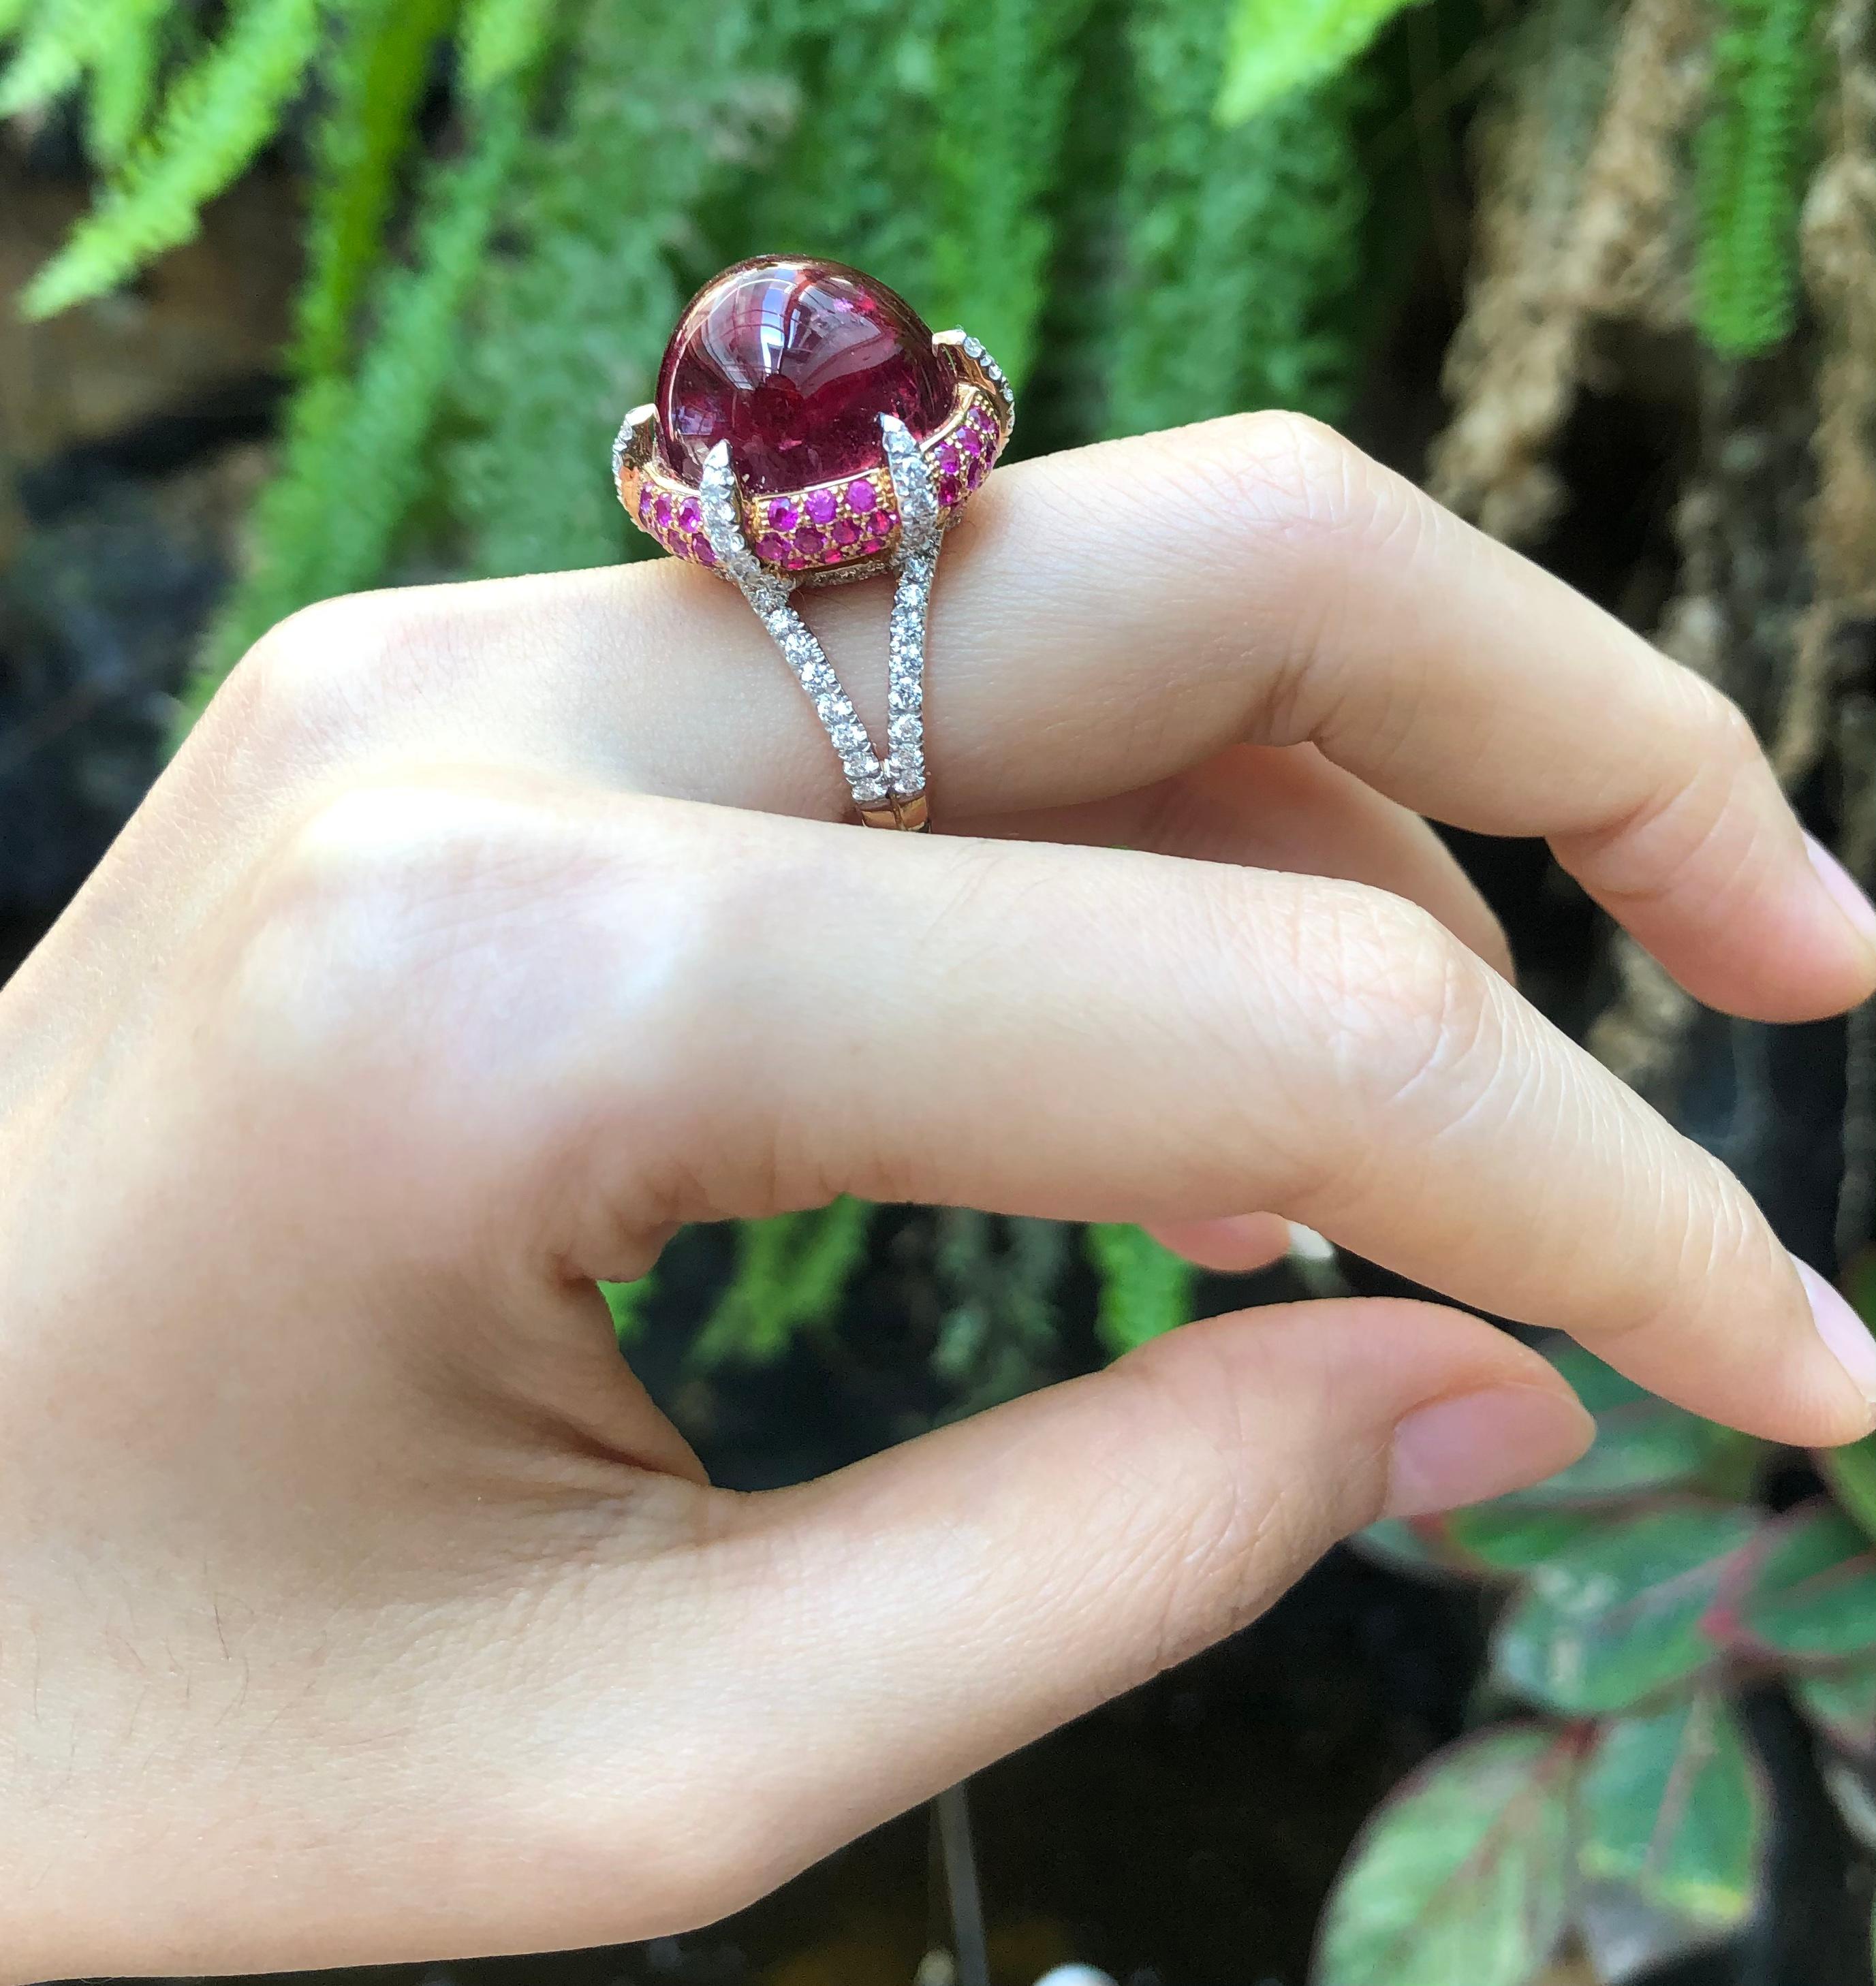 Cabochon Rubellite 23.46 carats with Pink Sapphire 1.35 carats and Diamond 0.96 carat Ring set in 18 Karat Rose Gold Settings

Width:  1.7 cm 
Length: 1.7 cm
Ring Size: 53
Total Weight: 15.21 grams

